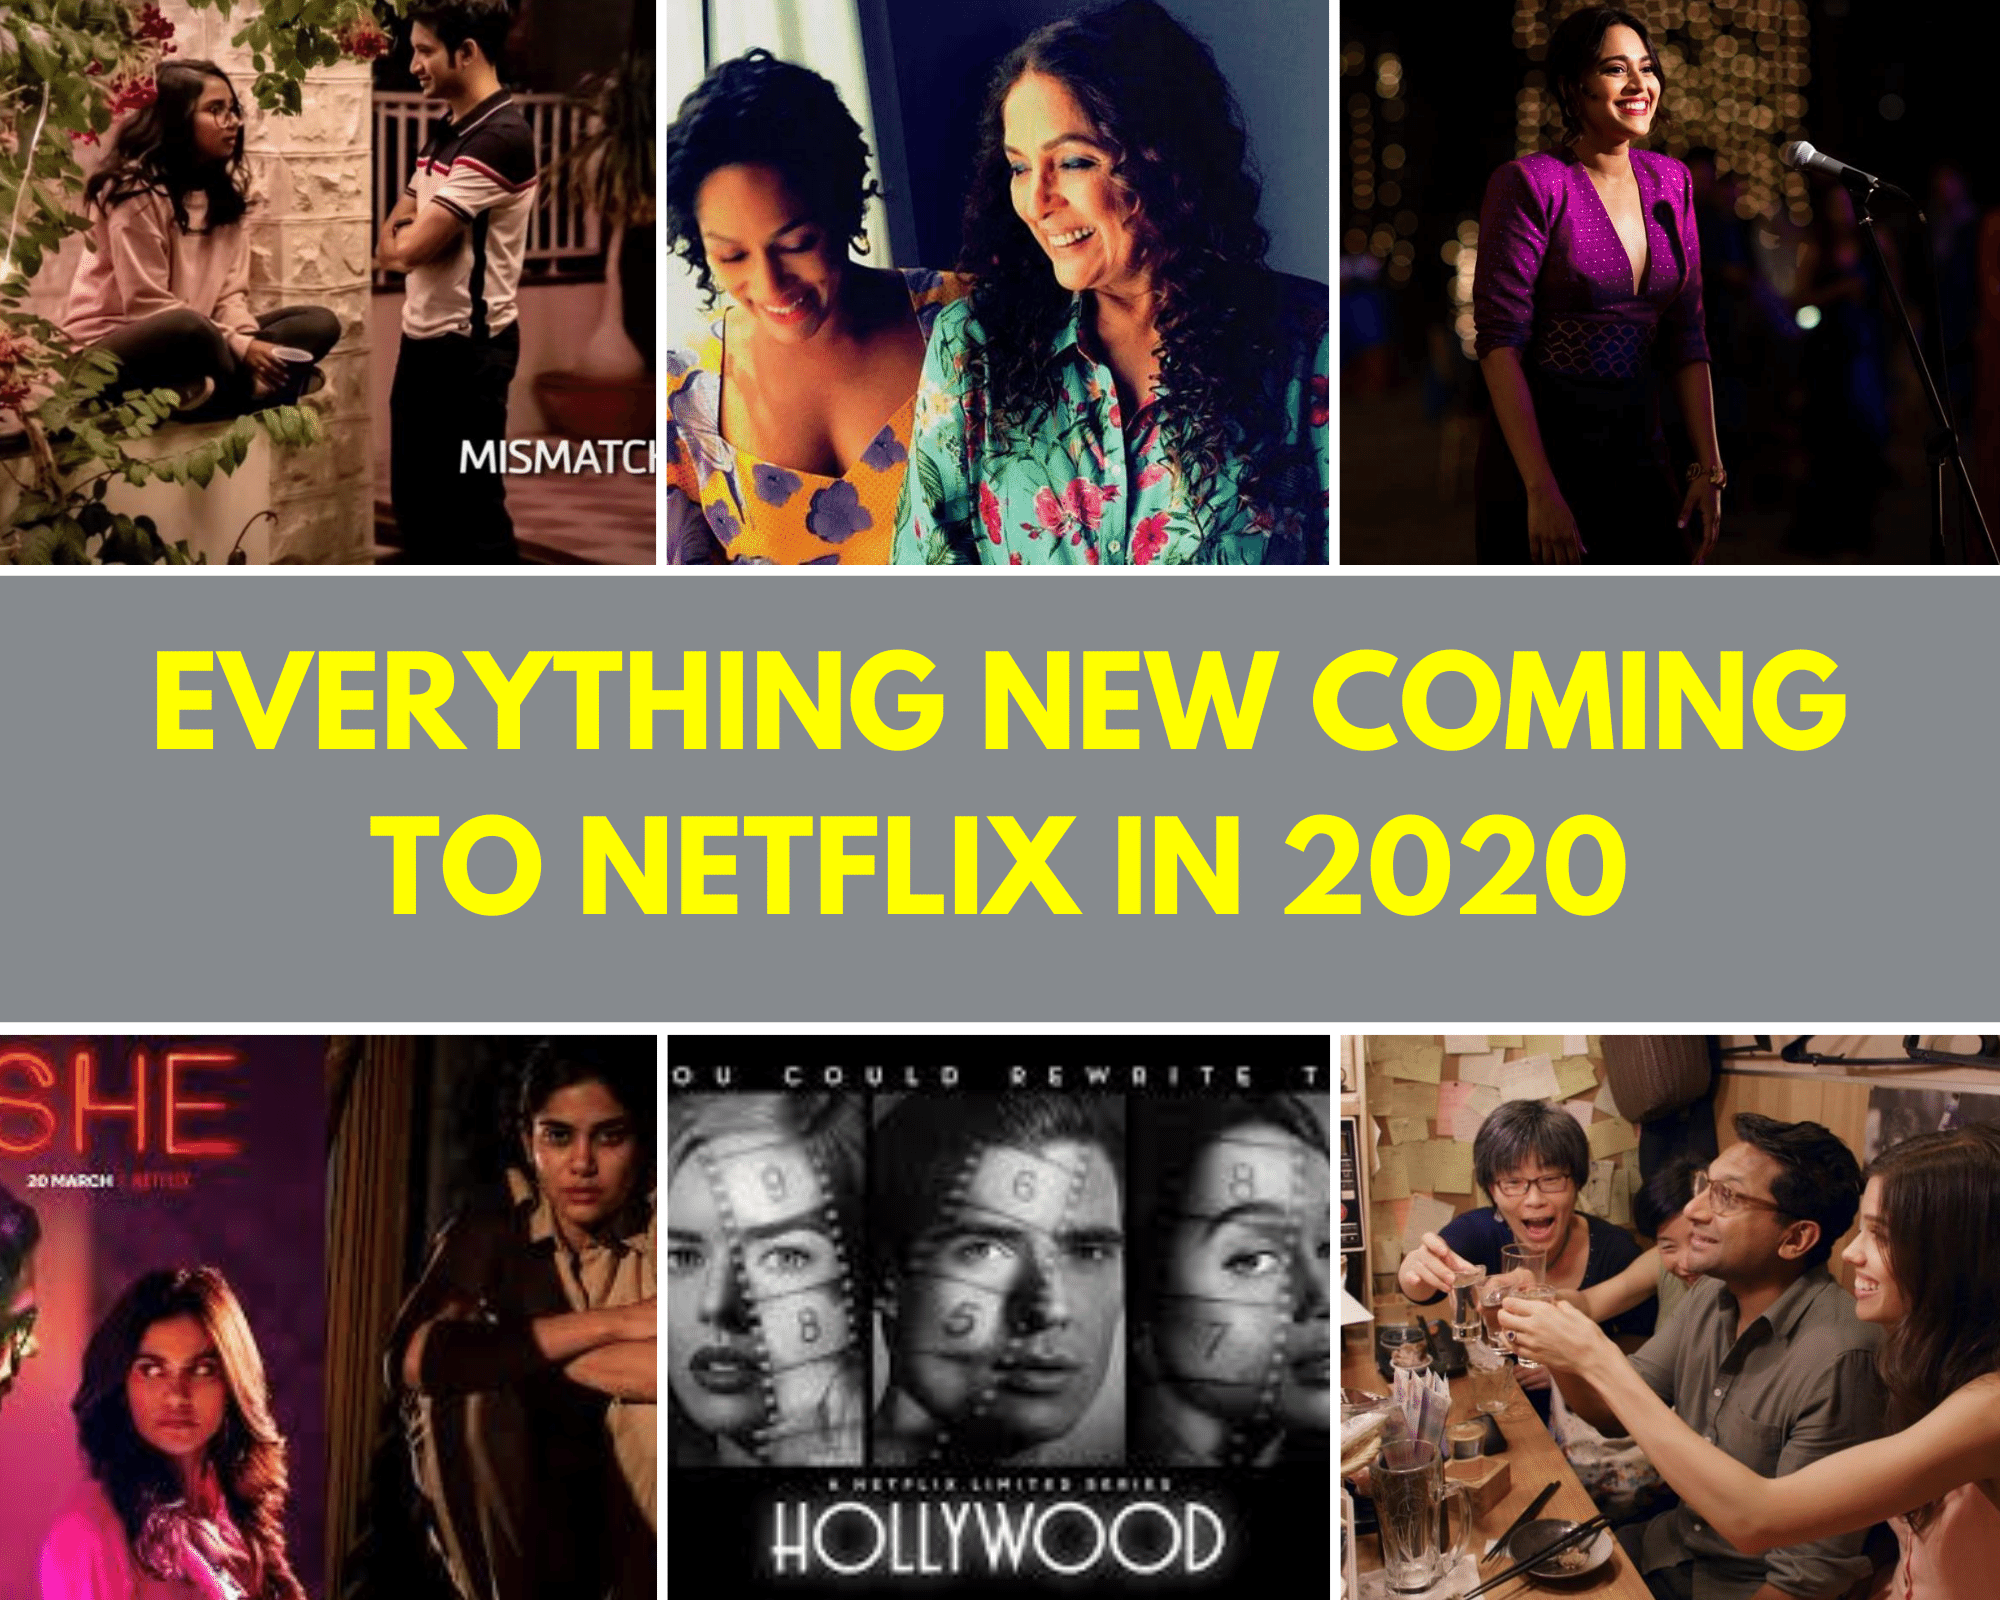 Everything new coming to Netflix in 2020